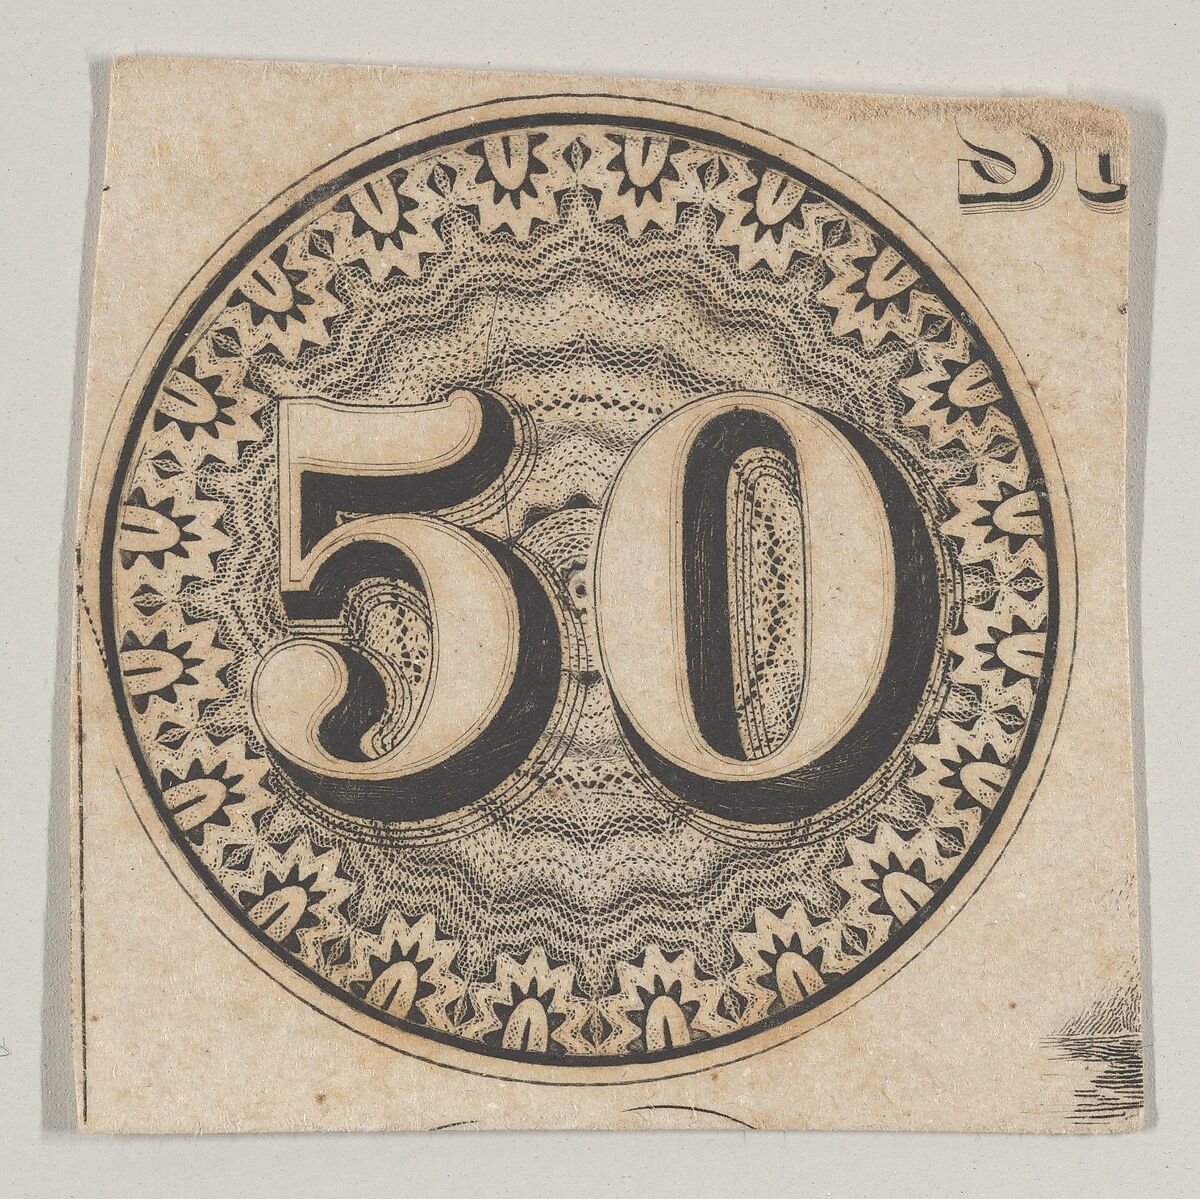 Banknote motif: the number 50 against an ornamental lathe work rondel resembling lace, Associated with Cyrus Durand (American, 1787–1868), Engraving; proof 